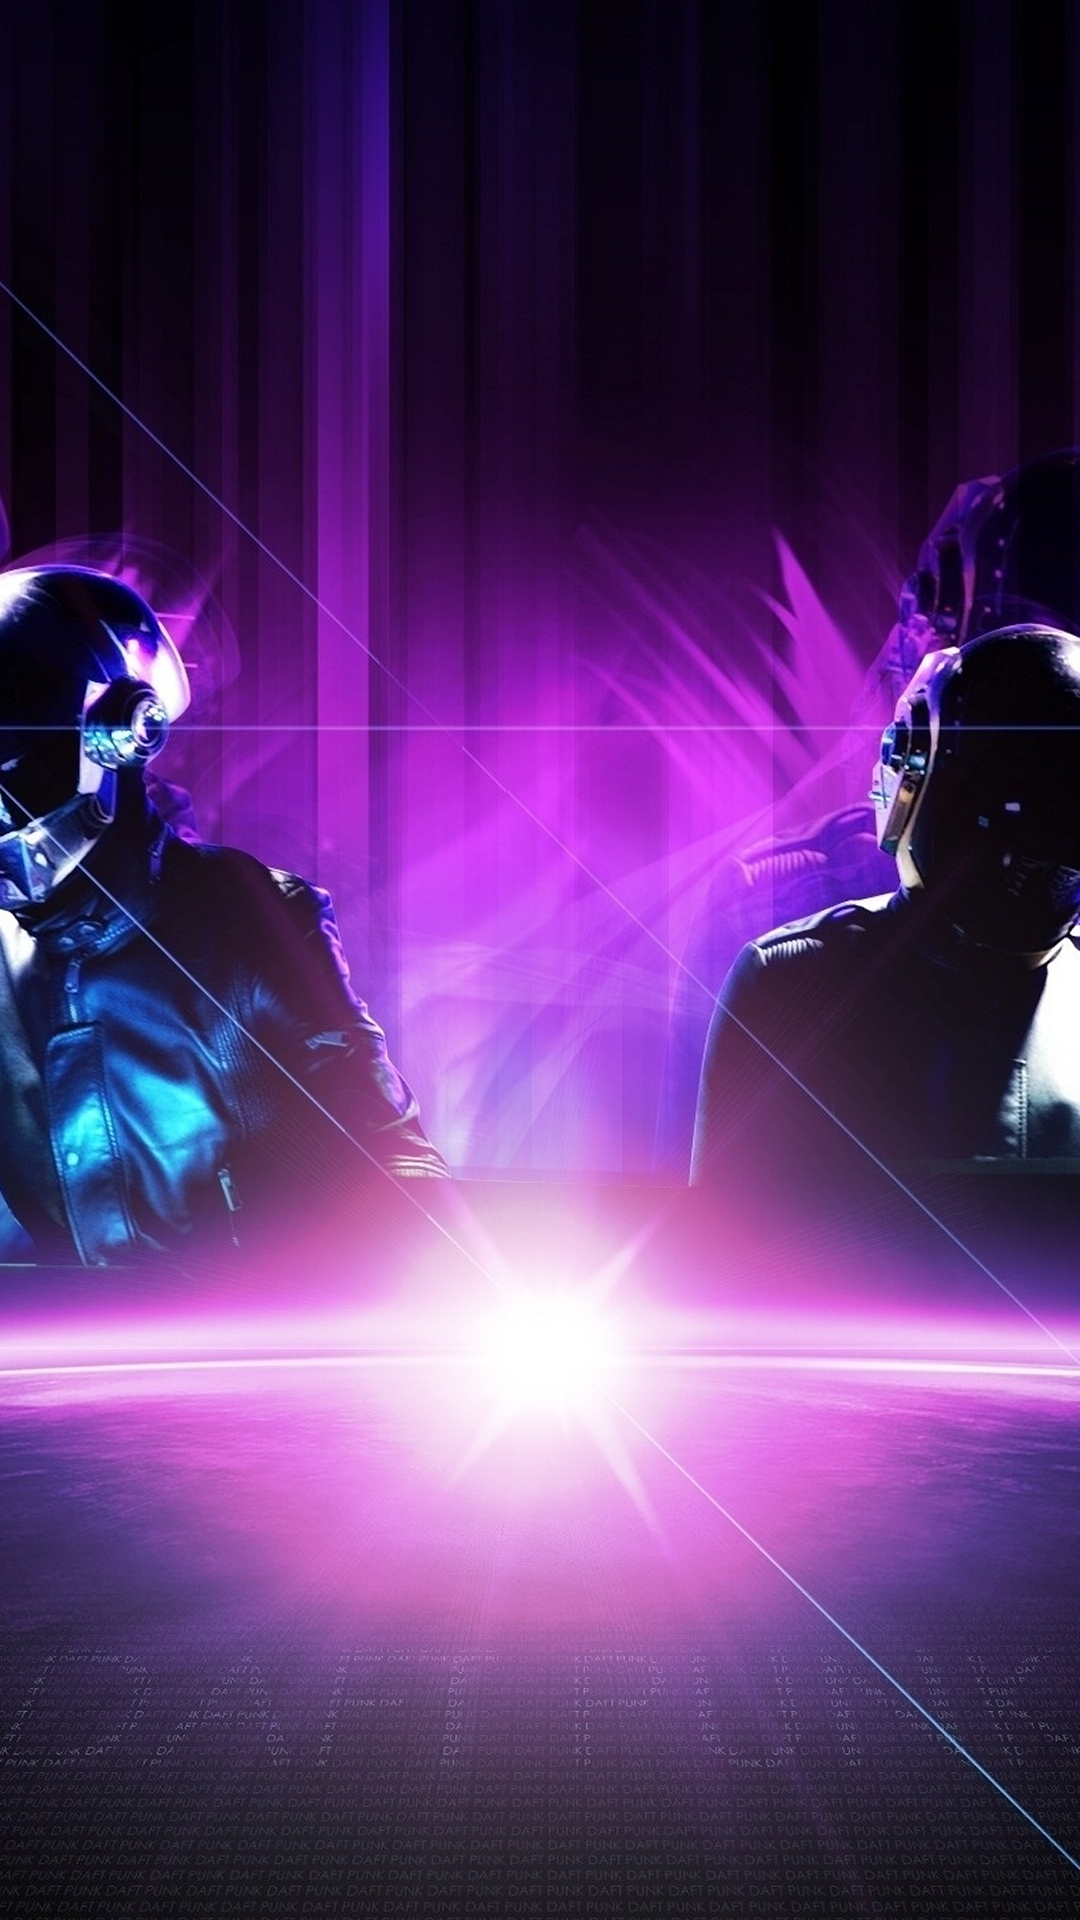 Wallpaper For Galaxy S4 With Daft Punk Purple Tone In